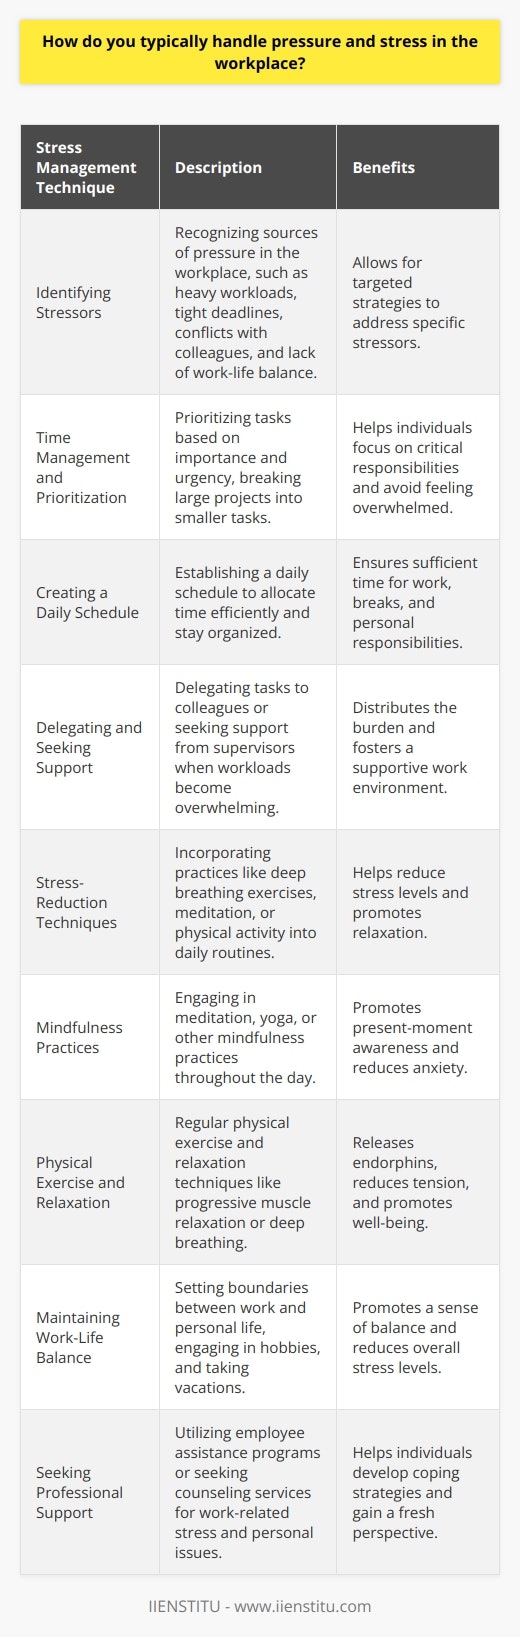 Handling pressure and stress in the workplace is a crucial skill for maintaining productivity and well-being. Effective stress management strategies can help individuals cope with challenging situations and prevent burnout. This article explores various techniques for dealing with pressure and stress in professional settings. Identifying Stressors The first step in managing stress is to identify the sources of pressure in the workplace. Common stressors include heavy workloads, tight deadlines, conflicts with colleagues, and lack of work-life balance. By recognizing these triggers, individuals can develop targeted strategies to address them. Time Management and Prioritization Effective time management is essential for reducing stress in the workplace. Prioritizing tasks based on importance and urgency helps individuals focus on critical responsibilities and avoid feeling overwhelmed. Breaking large projects into smaller, manageable tasks can also make them less daunting. Creating a Daily Schedule Establishing a daily schedule can help individuals allocate their time efficiently and stay organized. By planning out tasks and activities, individuals can ensure that they have sufficient time for work, breaks, and personal responsibilities. Delegating and Seeking Support Delegating tasks to colleagues or seeking support from supervisors can help alleviate pressure when workloads become overwhelming. Collaborating with team members and sharing responsibilities can distribute the burden and foster a supportive work environment. Stress-Reduction Techniques Incorporating stress-reduction techniques into daily routines can help individuals manage pressure more effectively. These techniques can include deep breathing exercises, meditation, or engaging in physical activity. Taking short breaks throughout the day to relax and recharge can also help reduce stress levels. Mindfulness Practices Mindfulness practices, such as meditation or yoga, can help individuals stay present and focused, reducing stress and anxiety. These practices can be done in short sessions throughout the day, even at ones desk. Physical Exercise and Relaxation Regular physical exercise is a powerful stress-reliever. Engaging in activities like walking, jogging, or cycling can help clear the mind and release endorphins, promoting a sense of well-being. Relaxation techniques, such as progressive muscle relaxation or deep breathing, can also help reduce tension. Maintaining Work-Life Balance Achieving a healthy work-life balance is crucial for managing stress in the workplace. Setting boundaries between work and personal life, such as avoiding checking work emails during off-hours, can help individuals disconnect and recharge. Engaging in hobbies, spending time with loved ones, and taking vacations can also promote a sense of balance and reduce overall stress levels. Seeking Professional Support When stress becomes overwhelming or persistent, seeking professional support can be beneficial. Many workplaces offer employee assistance programs (EAPs) that provide counseling services for work-related stress and personal issues. Talking to a therapist or counselor can help individuals develop coping strategies and gain a fresh perspective on challenging situations. In conclusion, handling pressure and stress in the workplace requires a combination of self-awareness, effective time management, stress-reduction techniques, and a commitment to maintaining work-life balance. By implementing these strategies and seeking support when needed, individuals can navigate the challenges of the workplace with greater resilience and well-being.